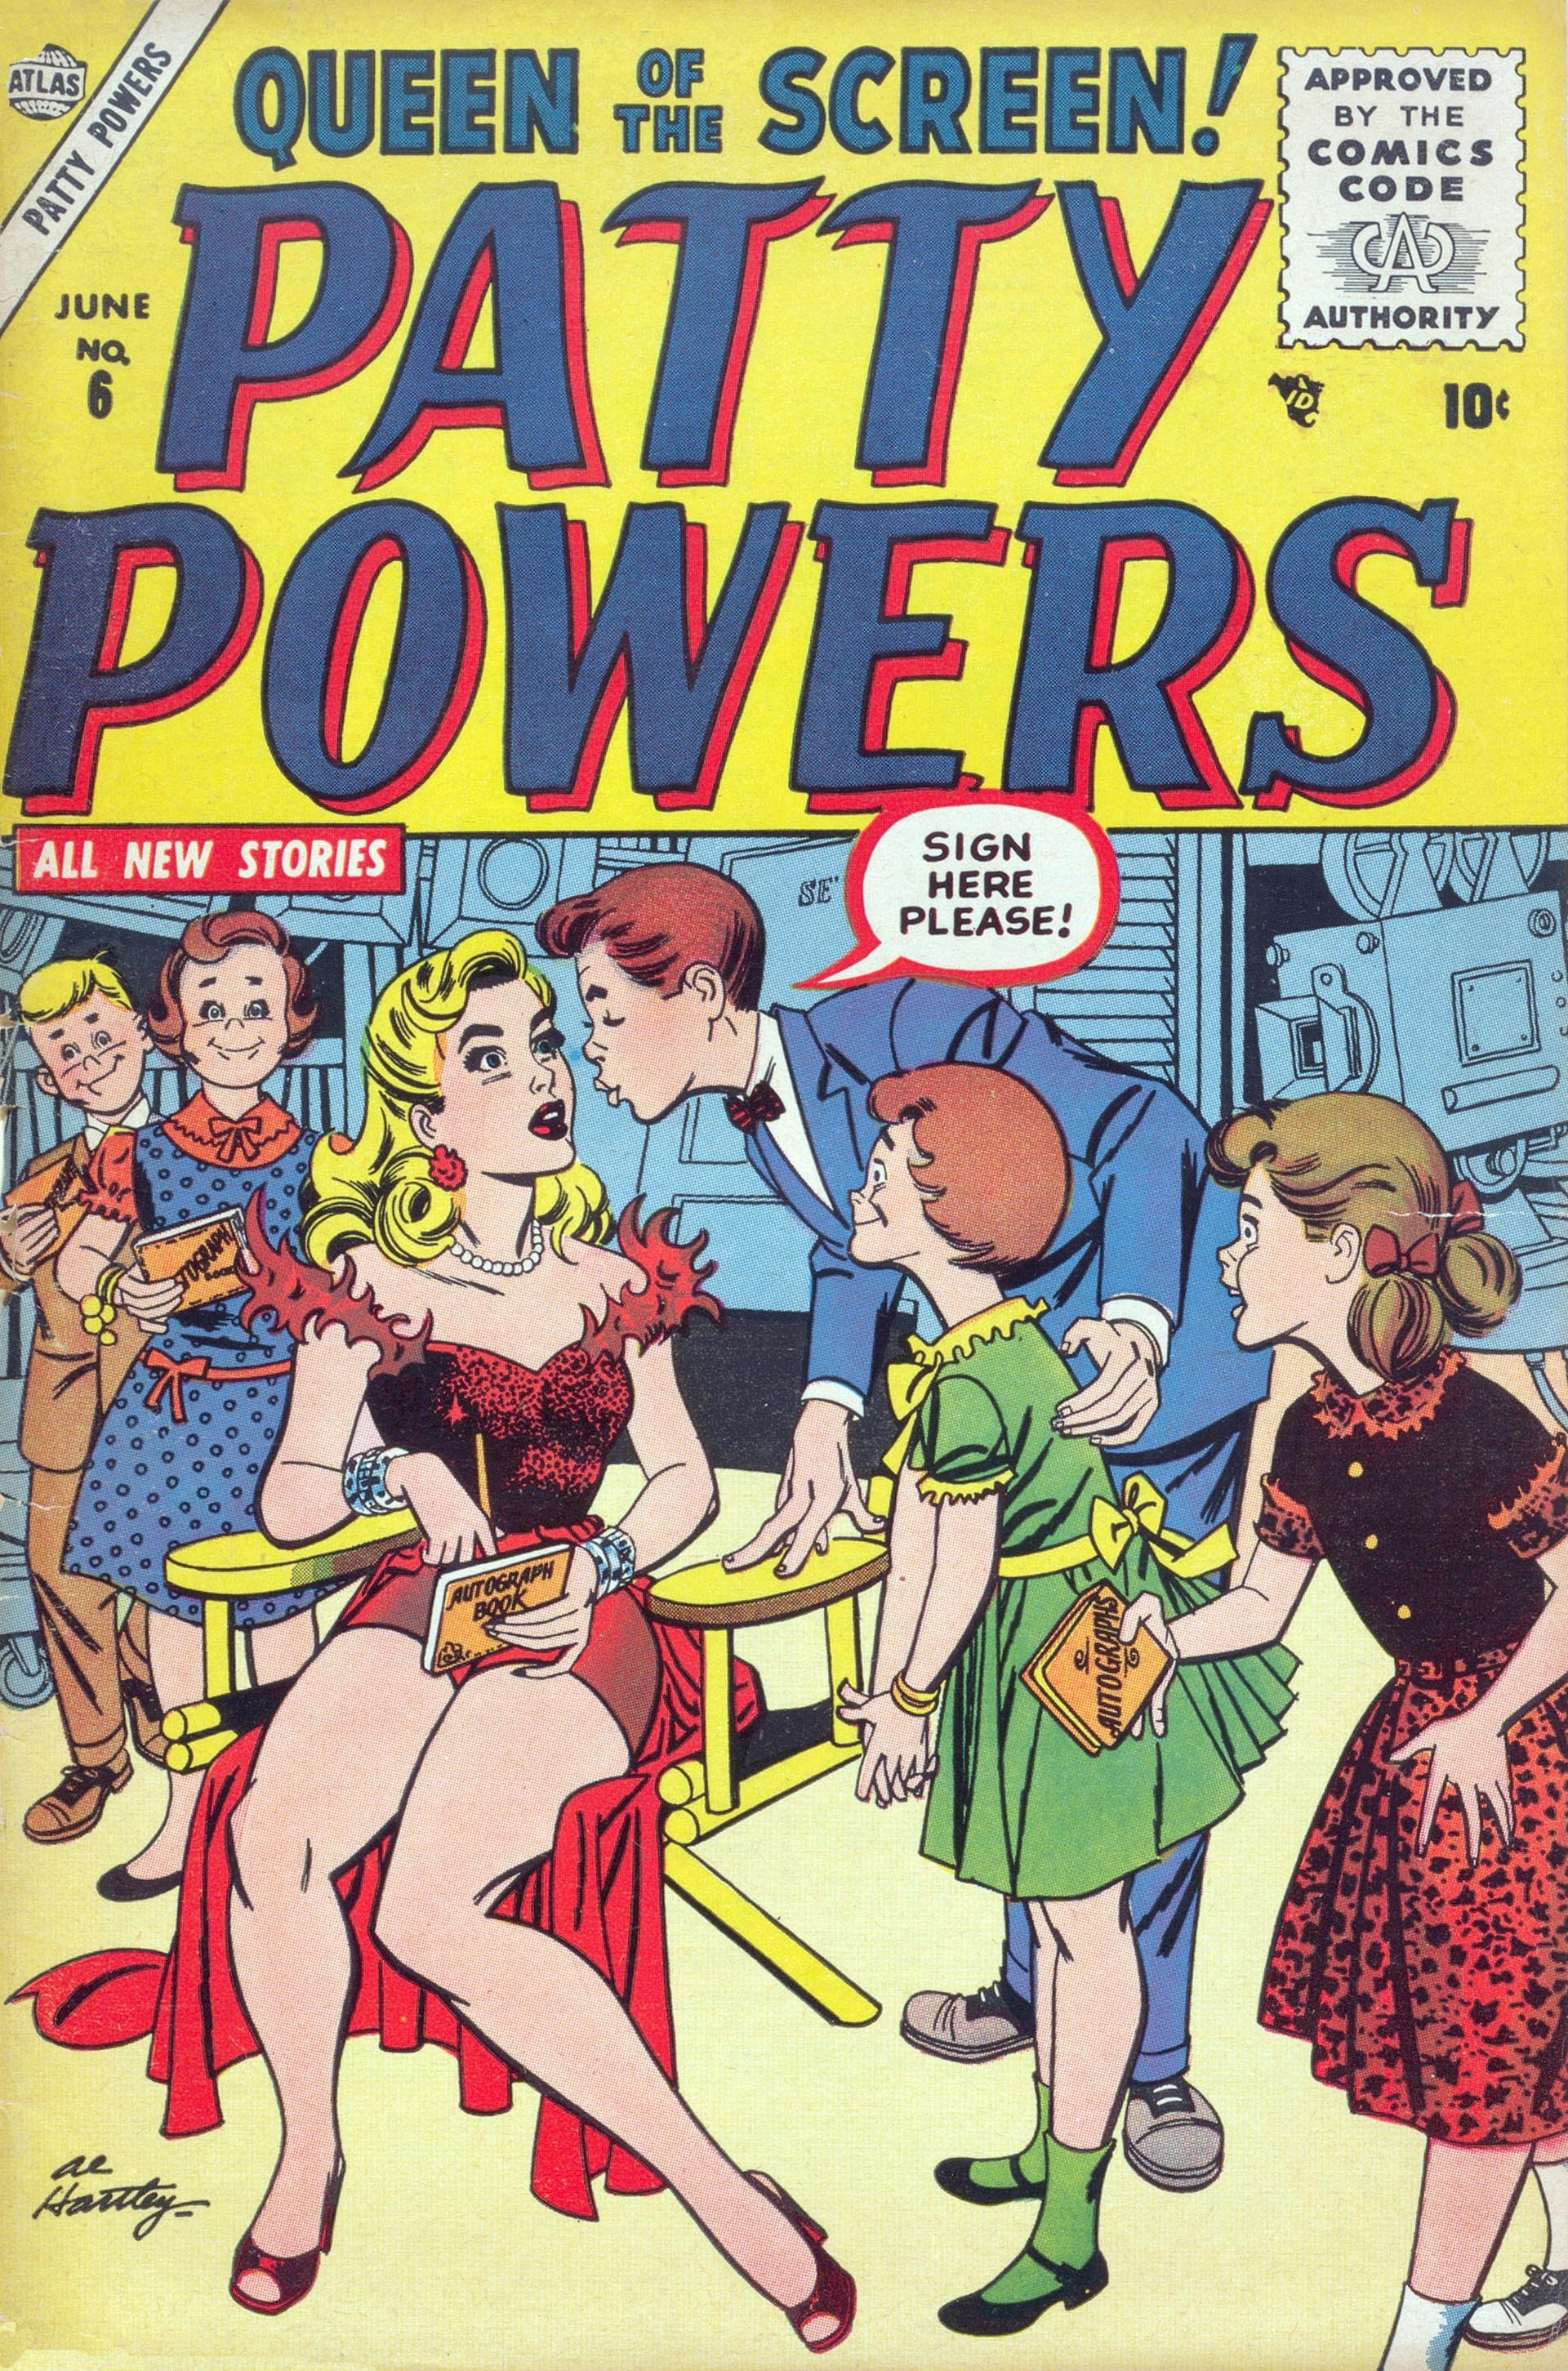 Read online Patty Powers comic -  Issue #6 - 1